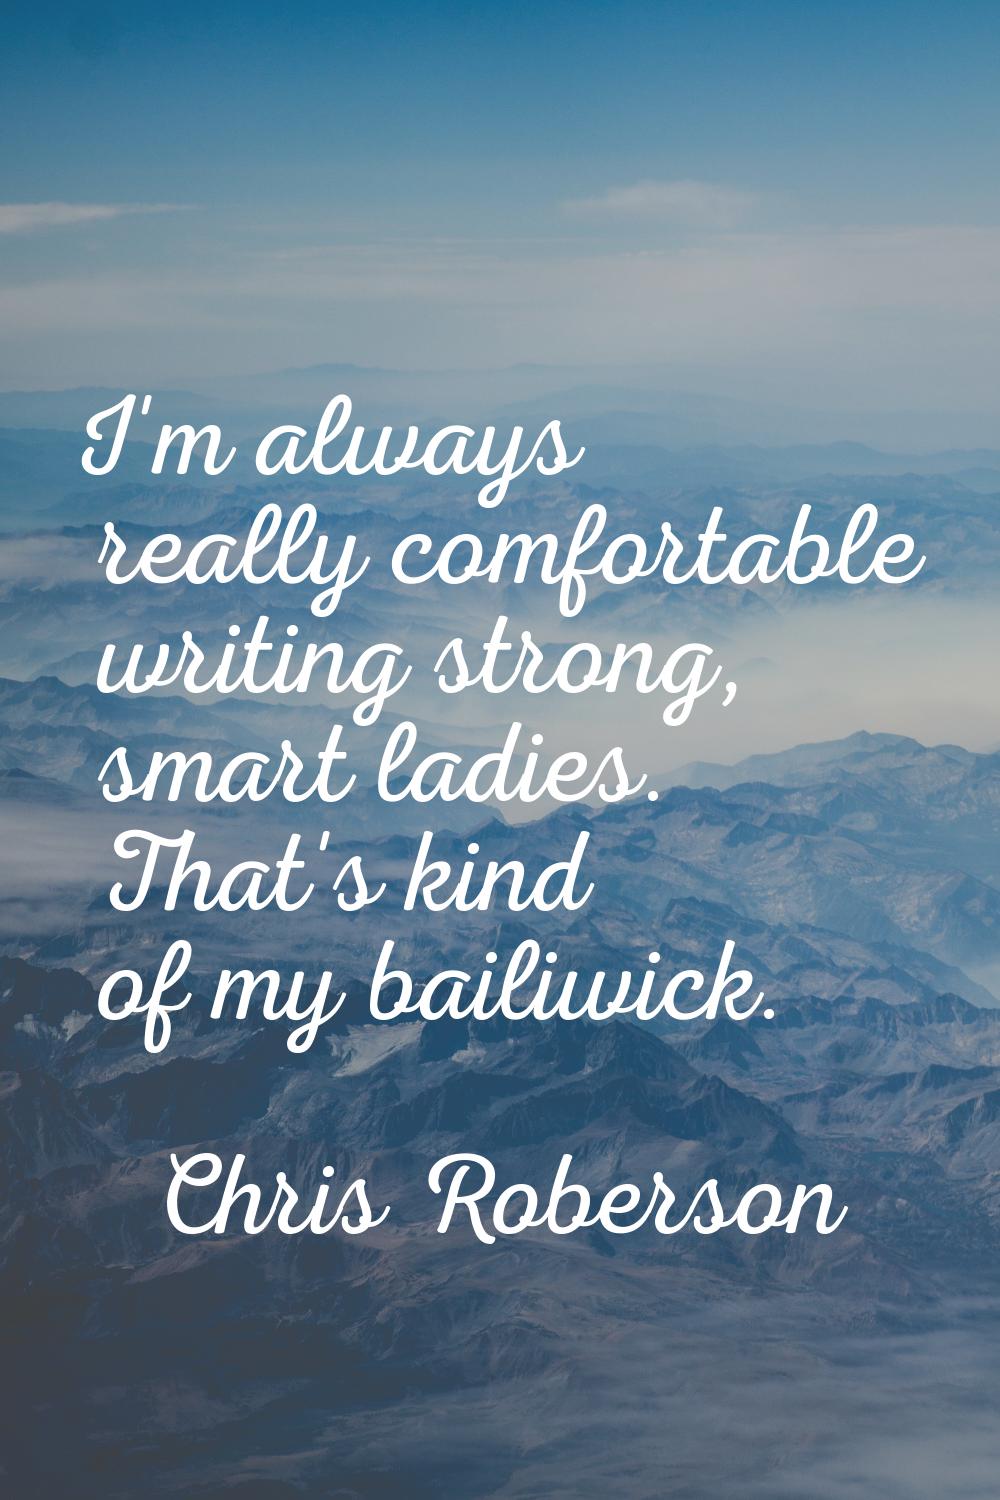 I'm always really comfortable writing strong, smart ladies. That's kind of my bailiwick.